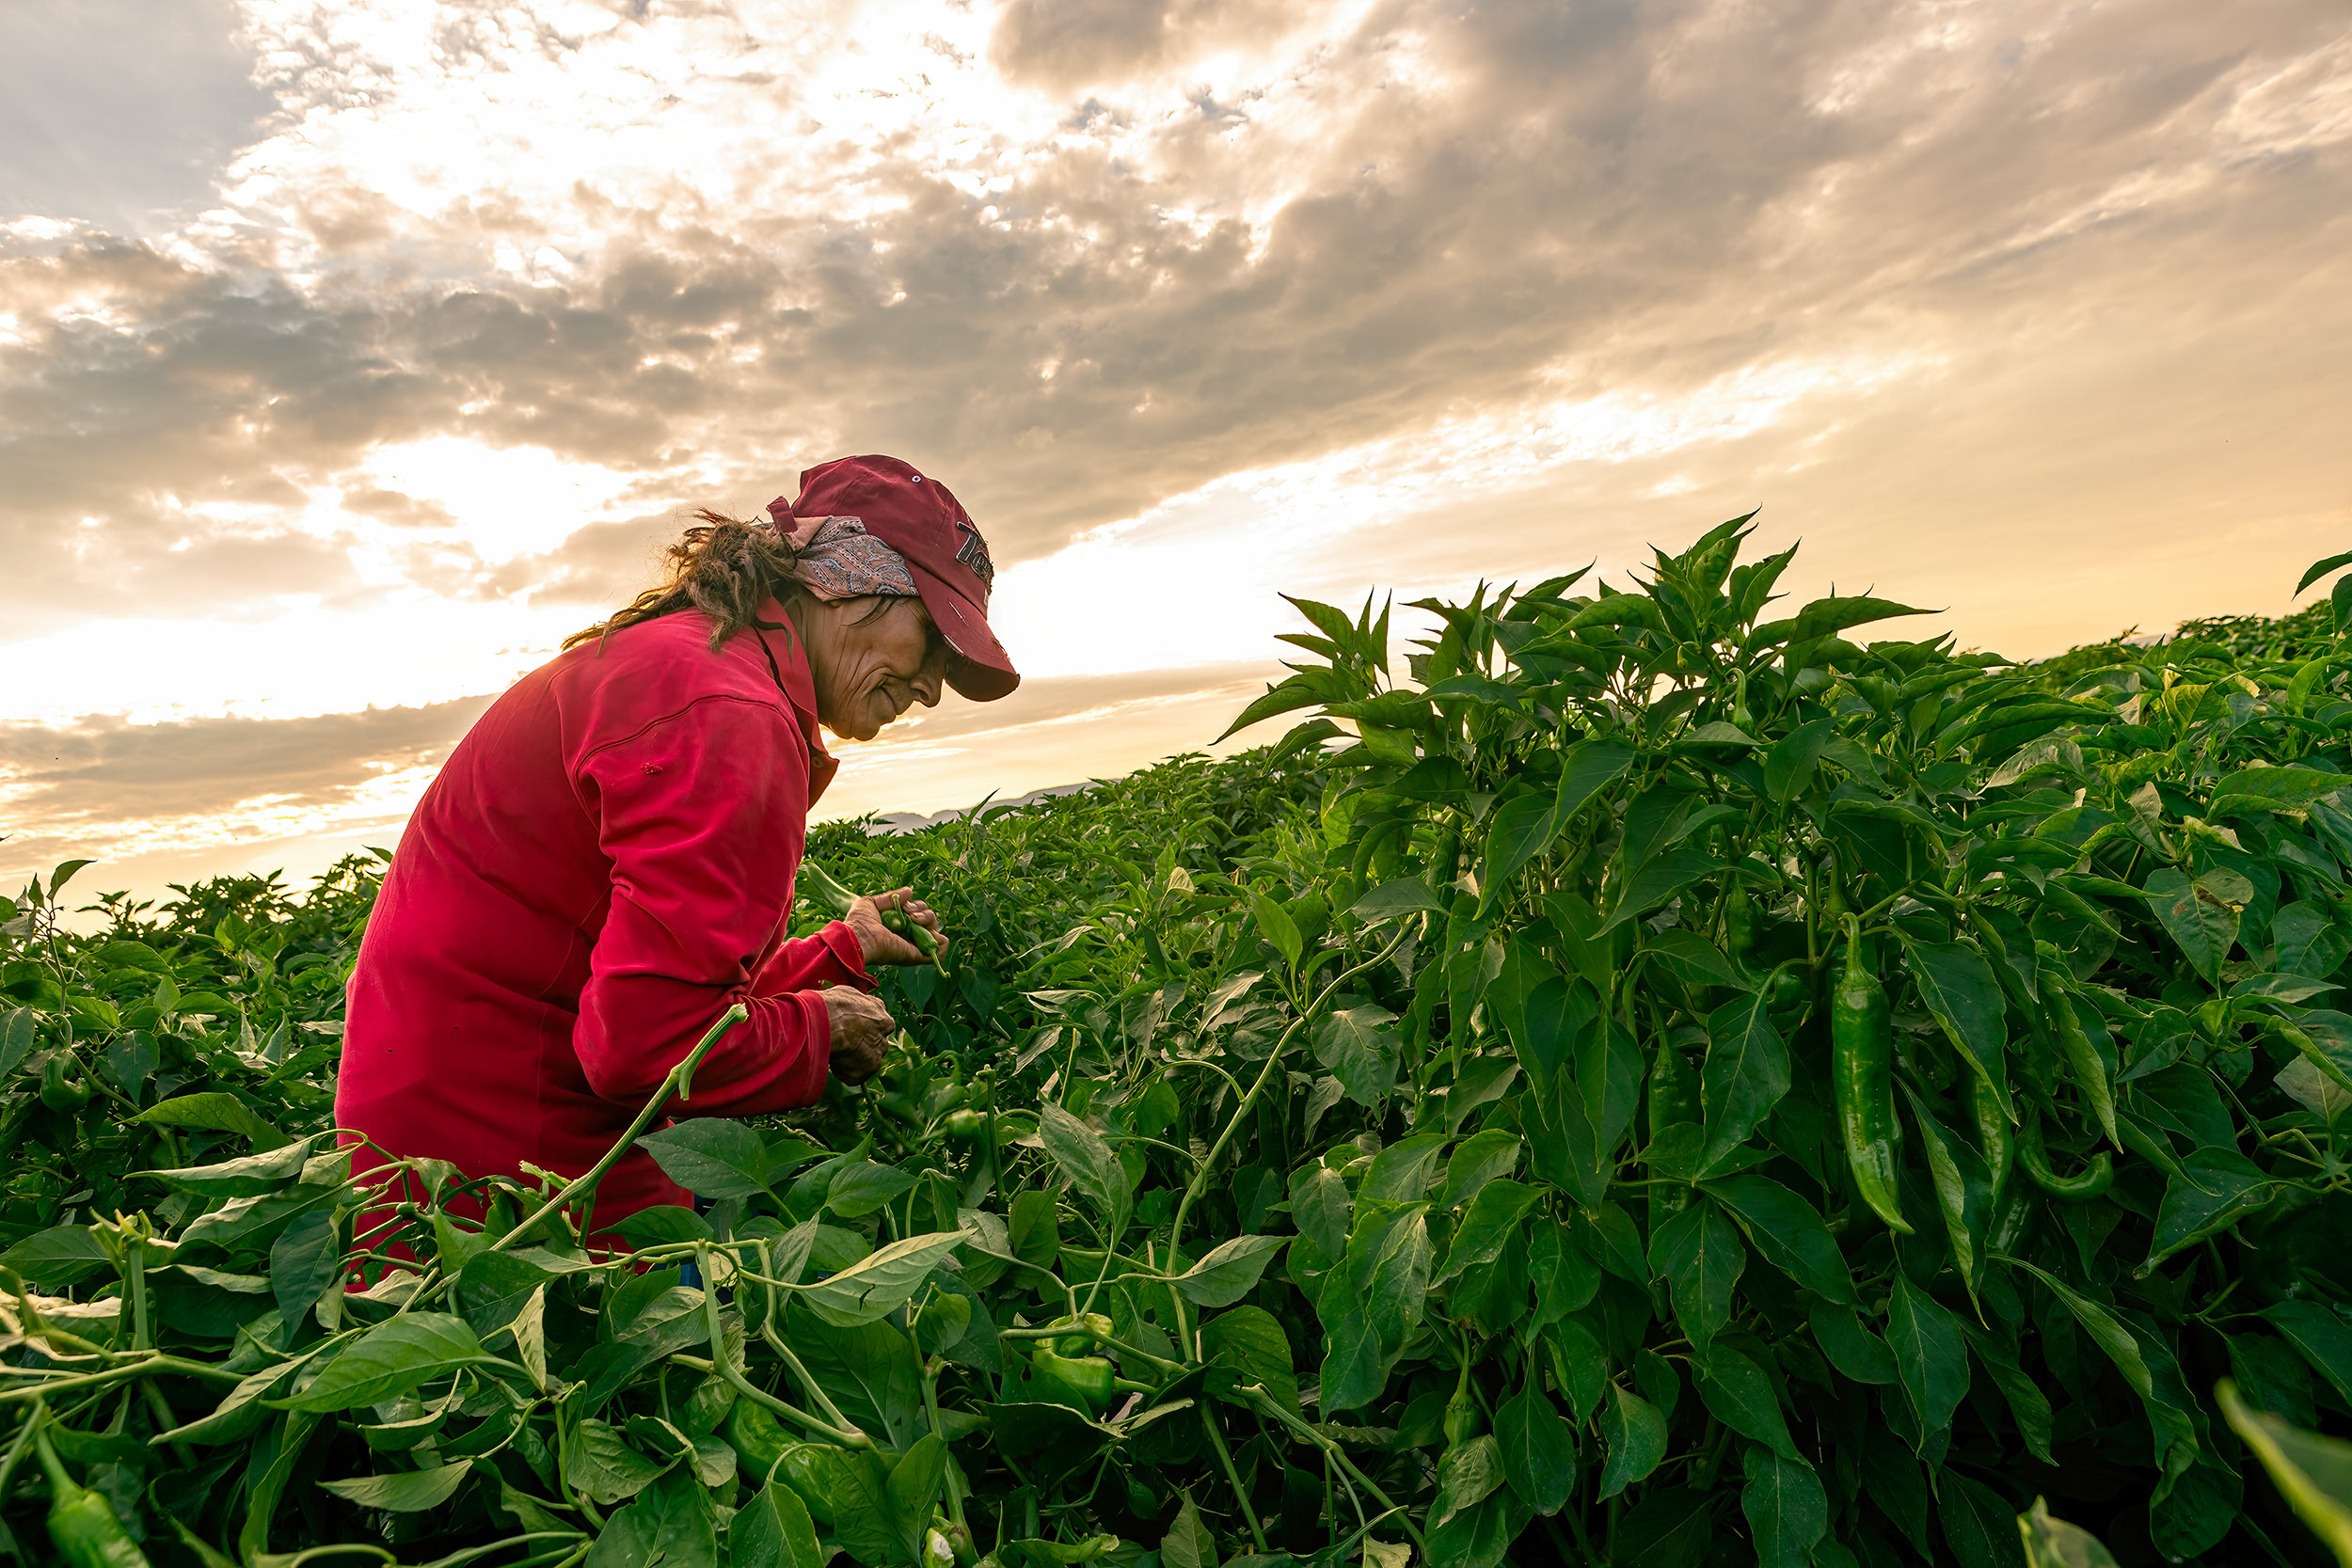 Green chili peppers harvest by a woman crop worker in field. Agriculture Photography